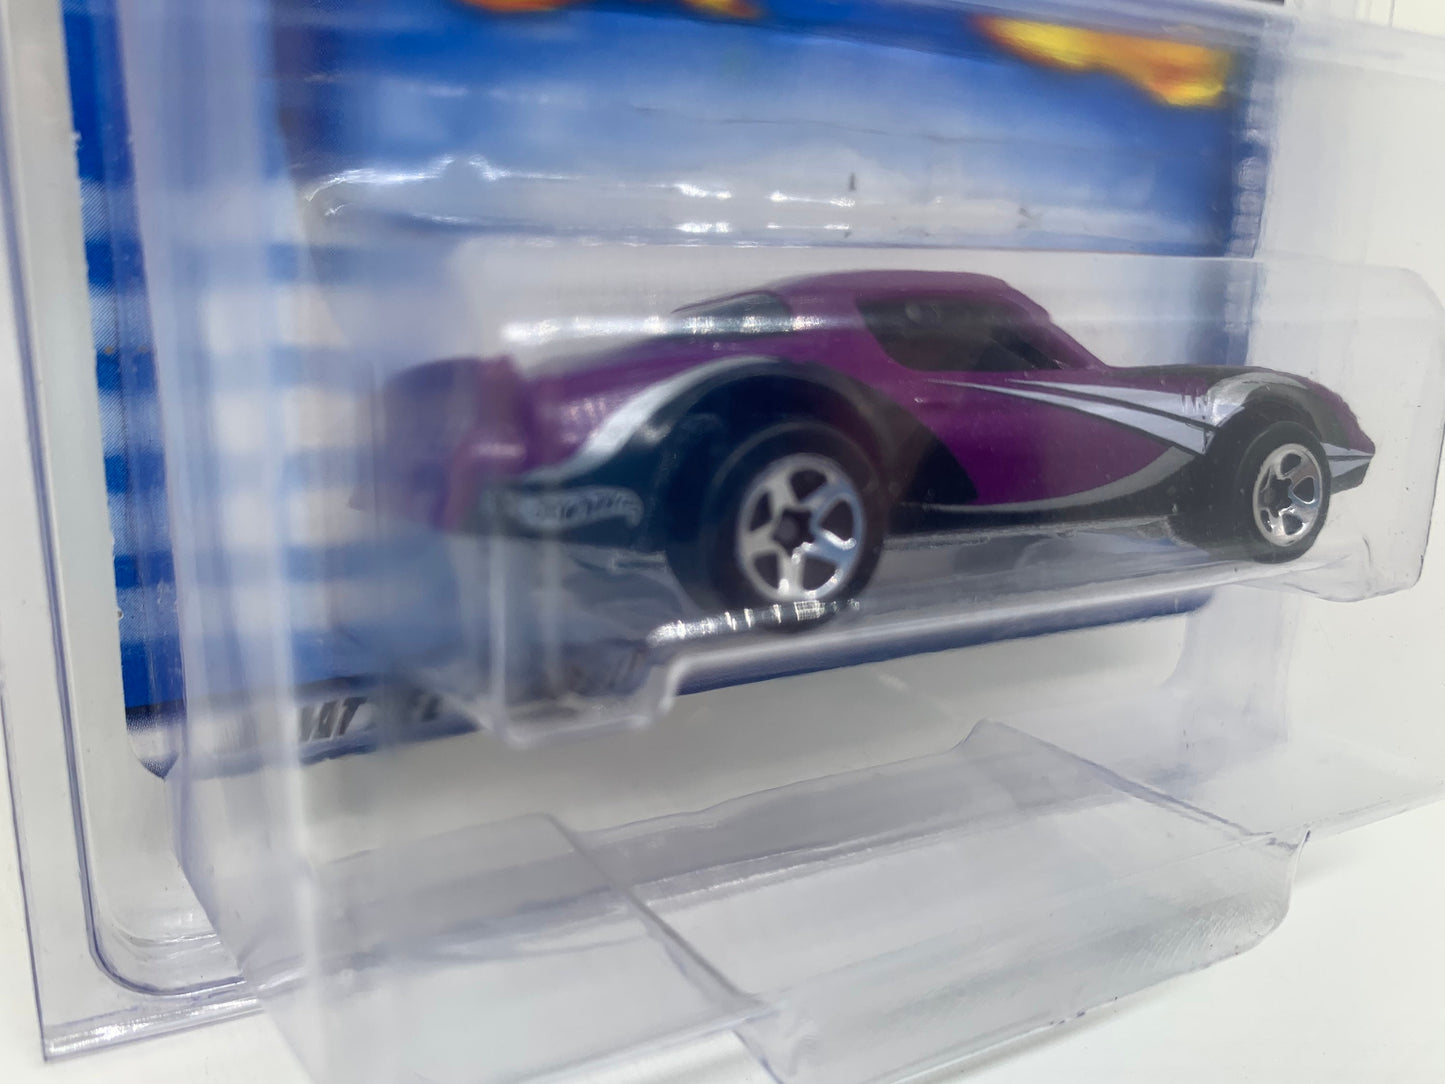 Hot Wheels Camaro Z28 Purple Mainline Collector #146 ZAMAC Miniature Collectable Model Toy Car Perfect Birthday Gift